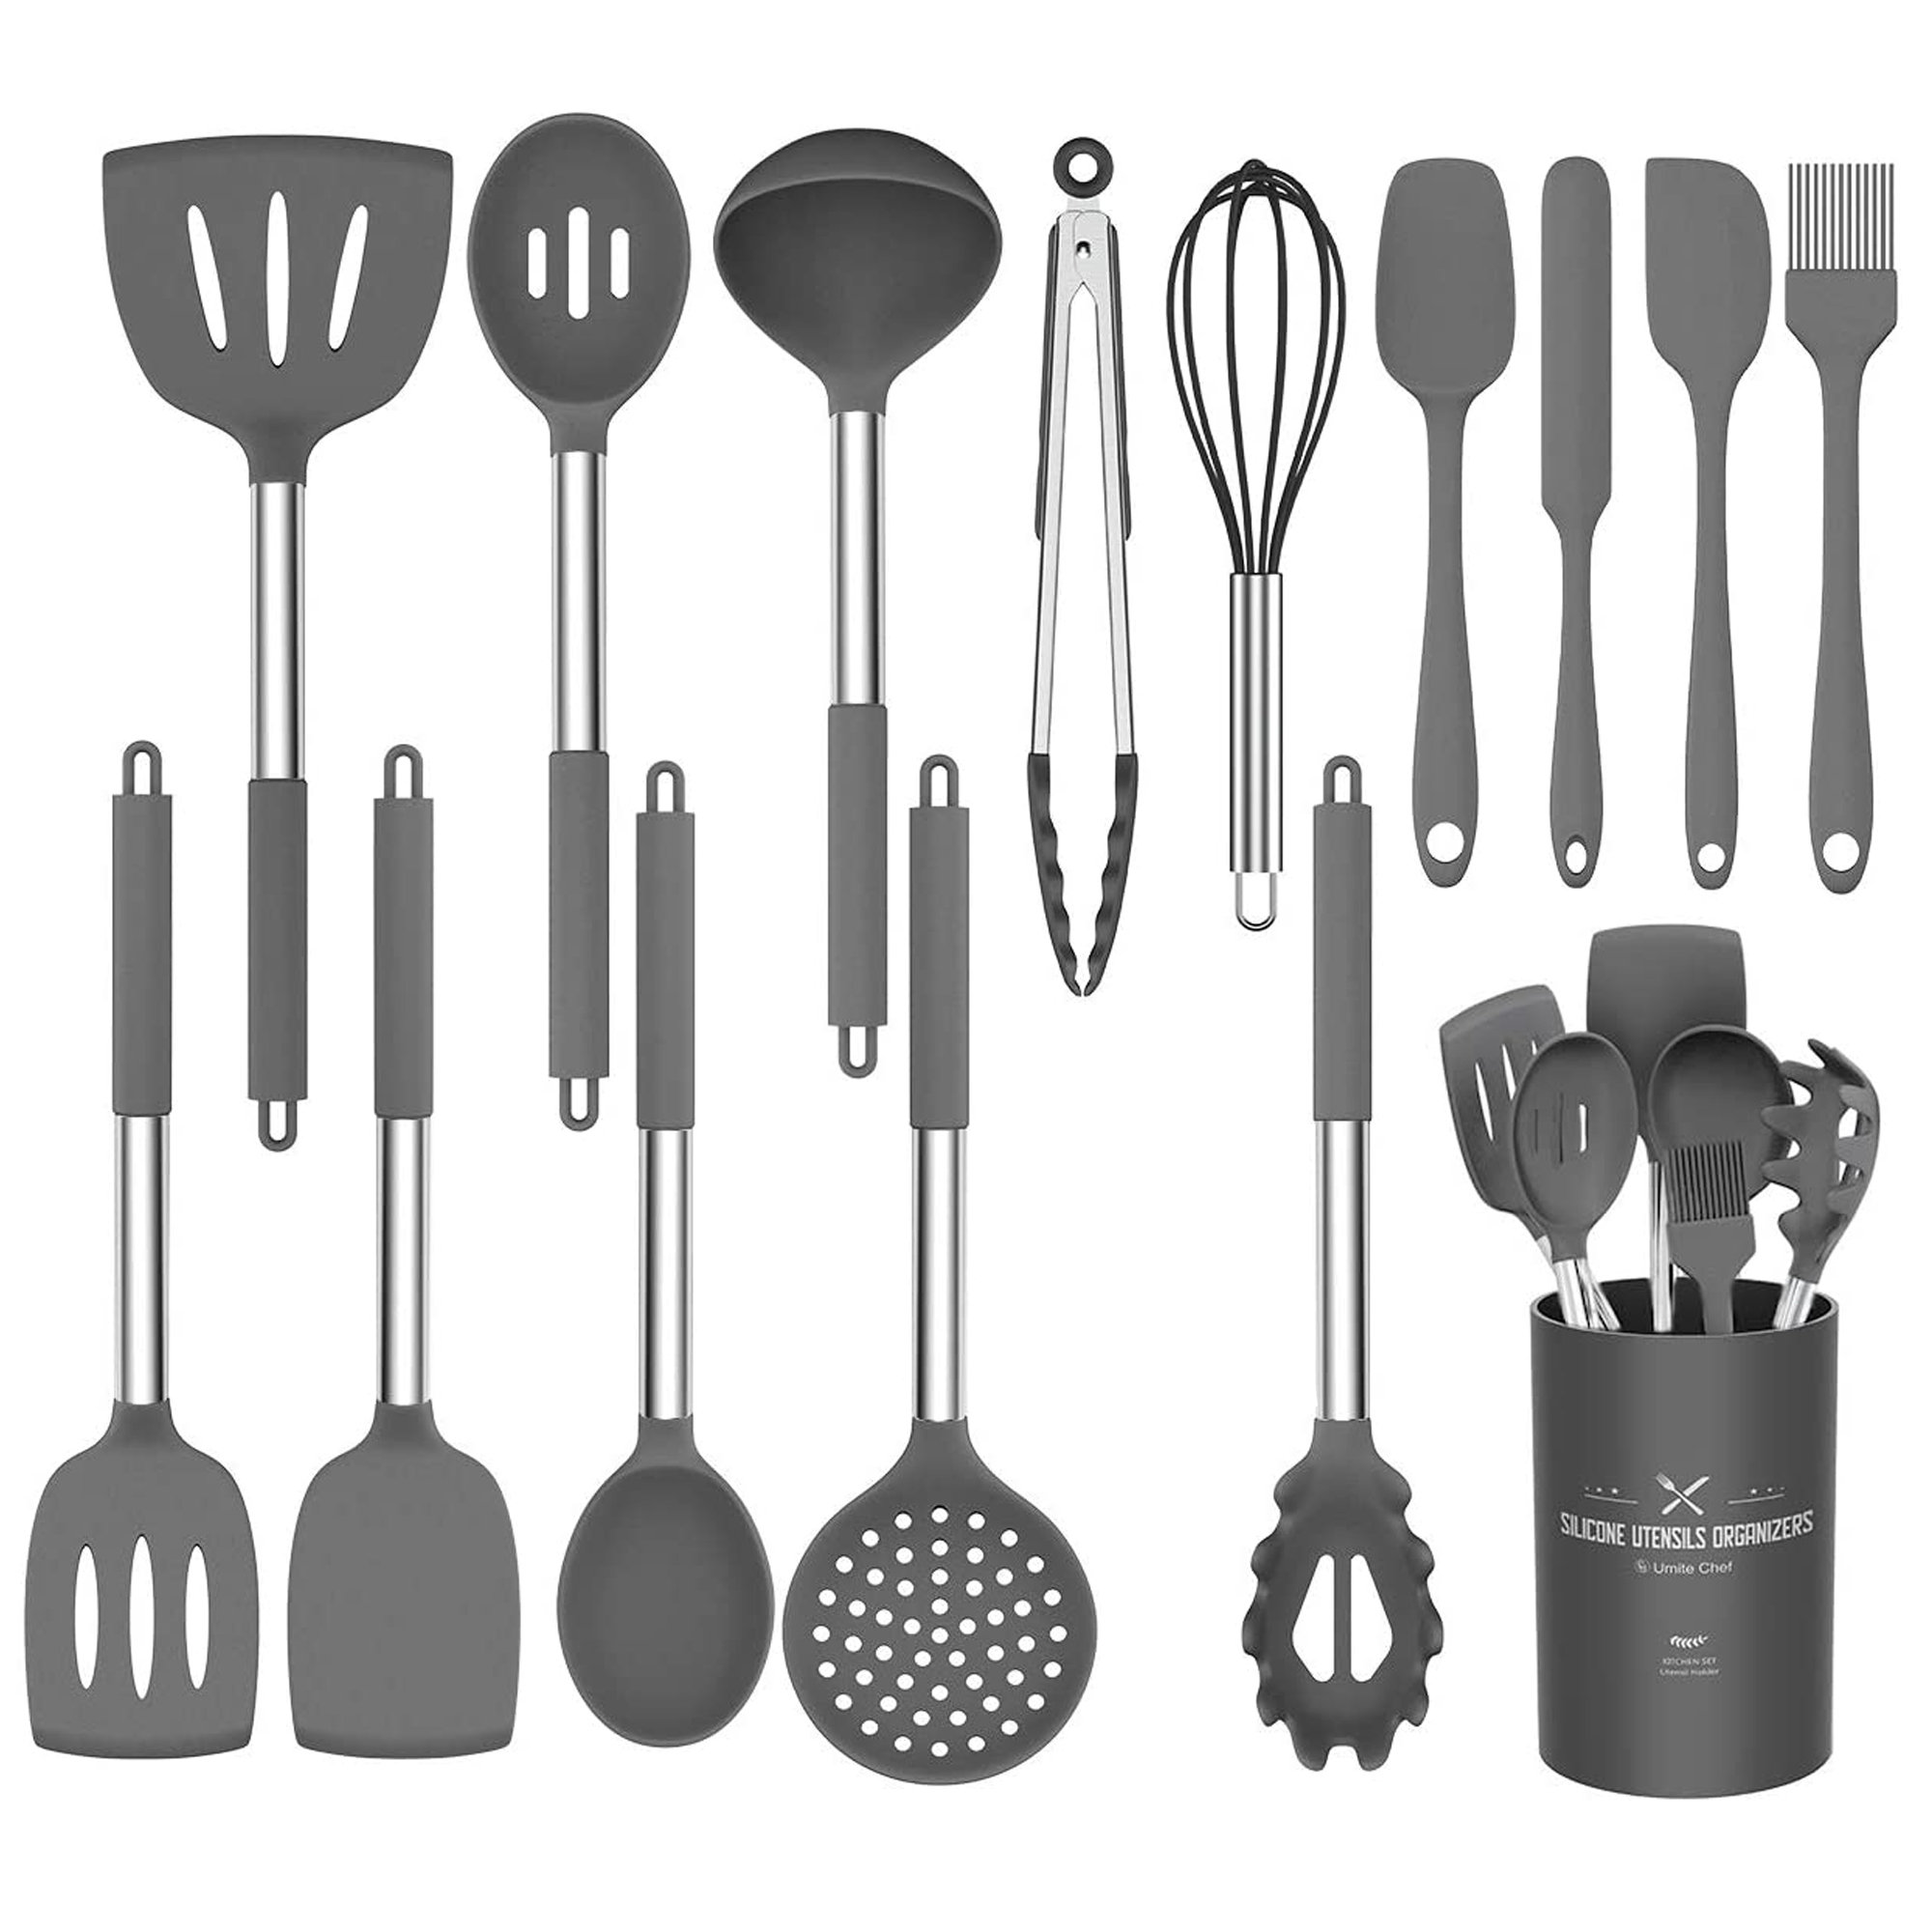 Silicone Cooking Utensil Set,Umite Chef Kitchen Utensils 15pcs Cooking Utensils Set Non-Stick Heat Resistan BPA-Free Silicone Stainless Steel Handle